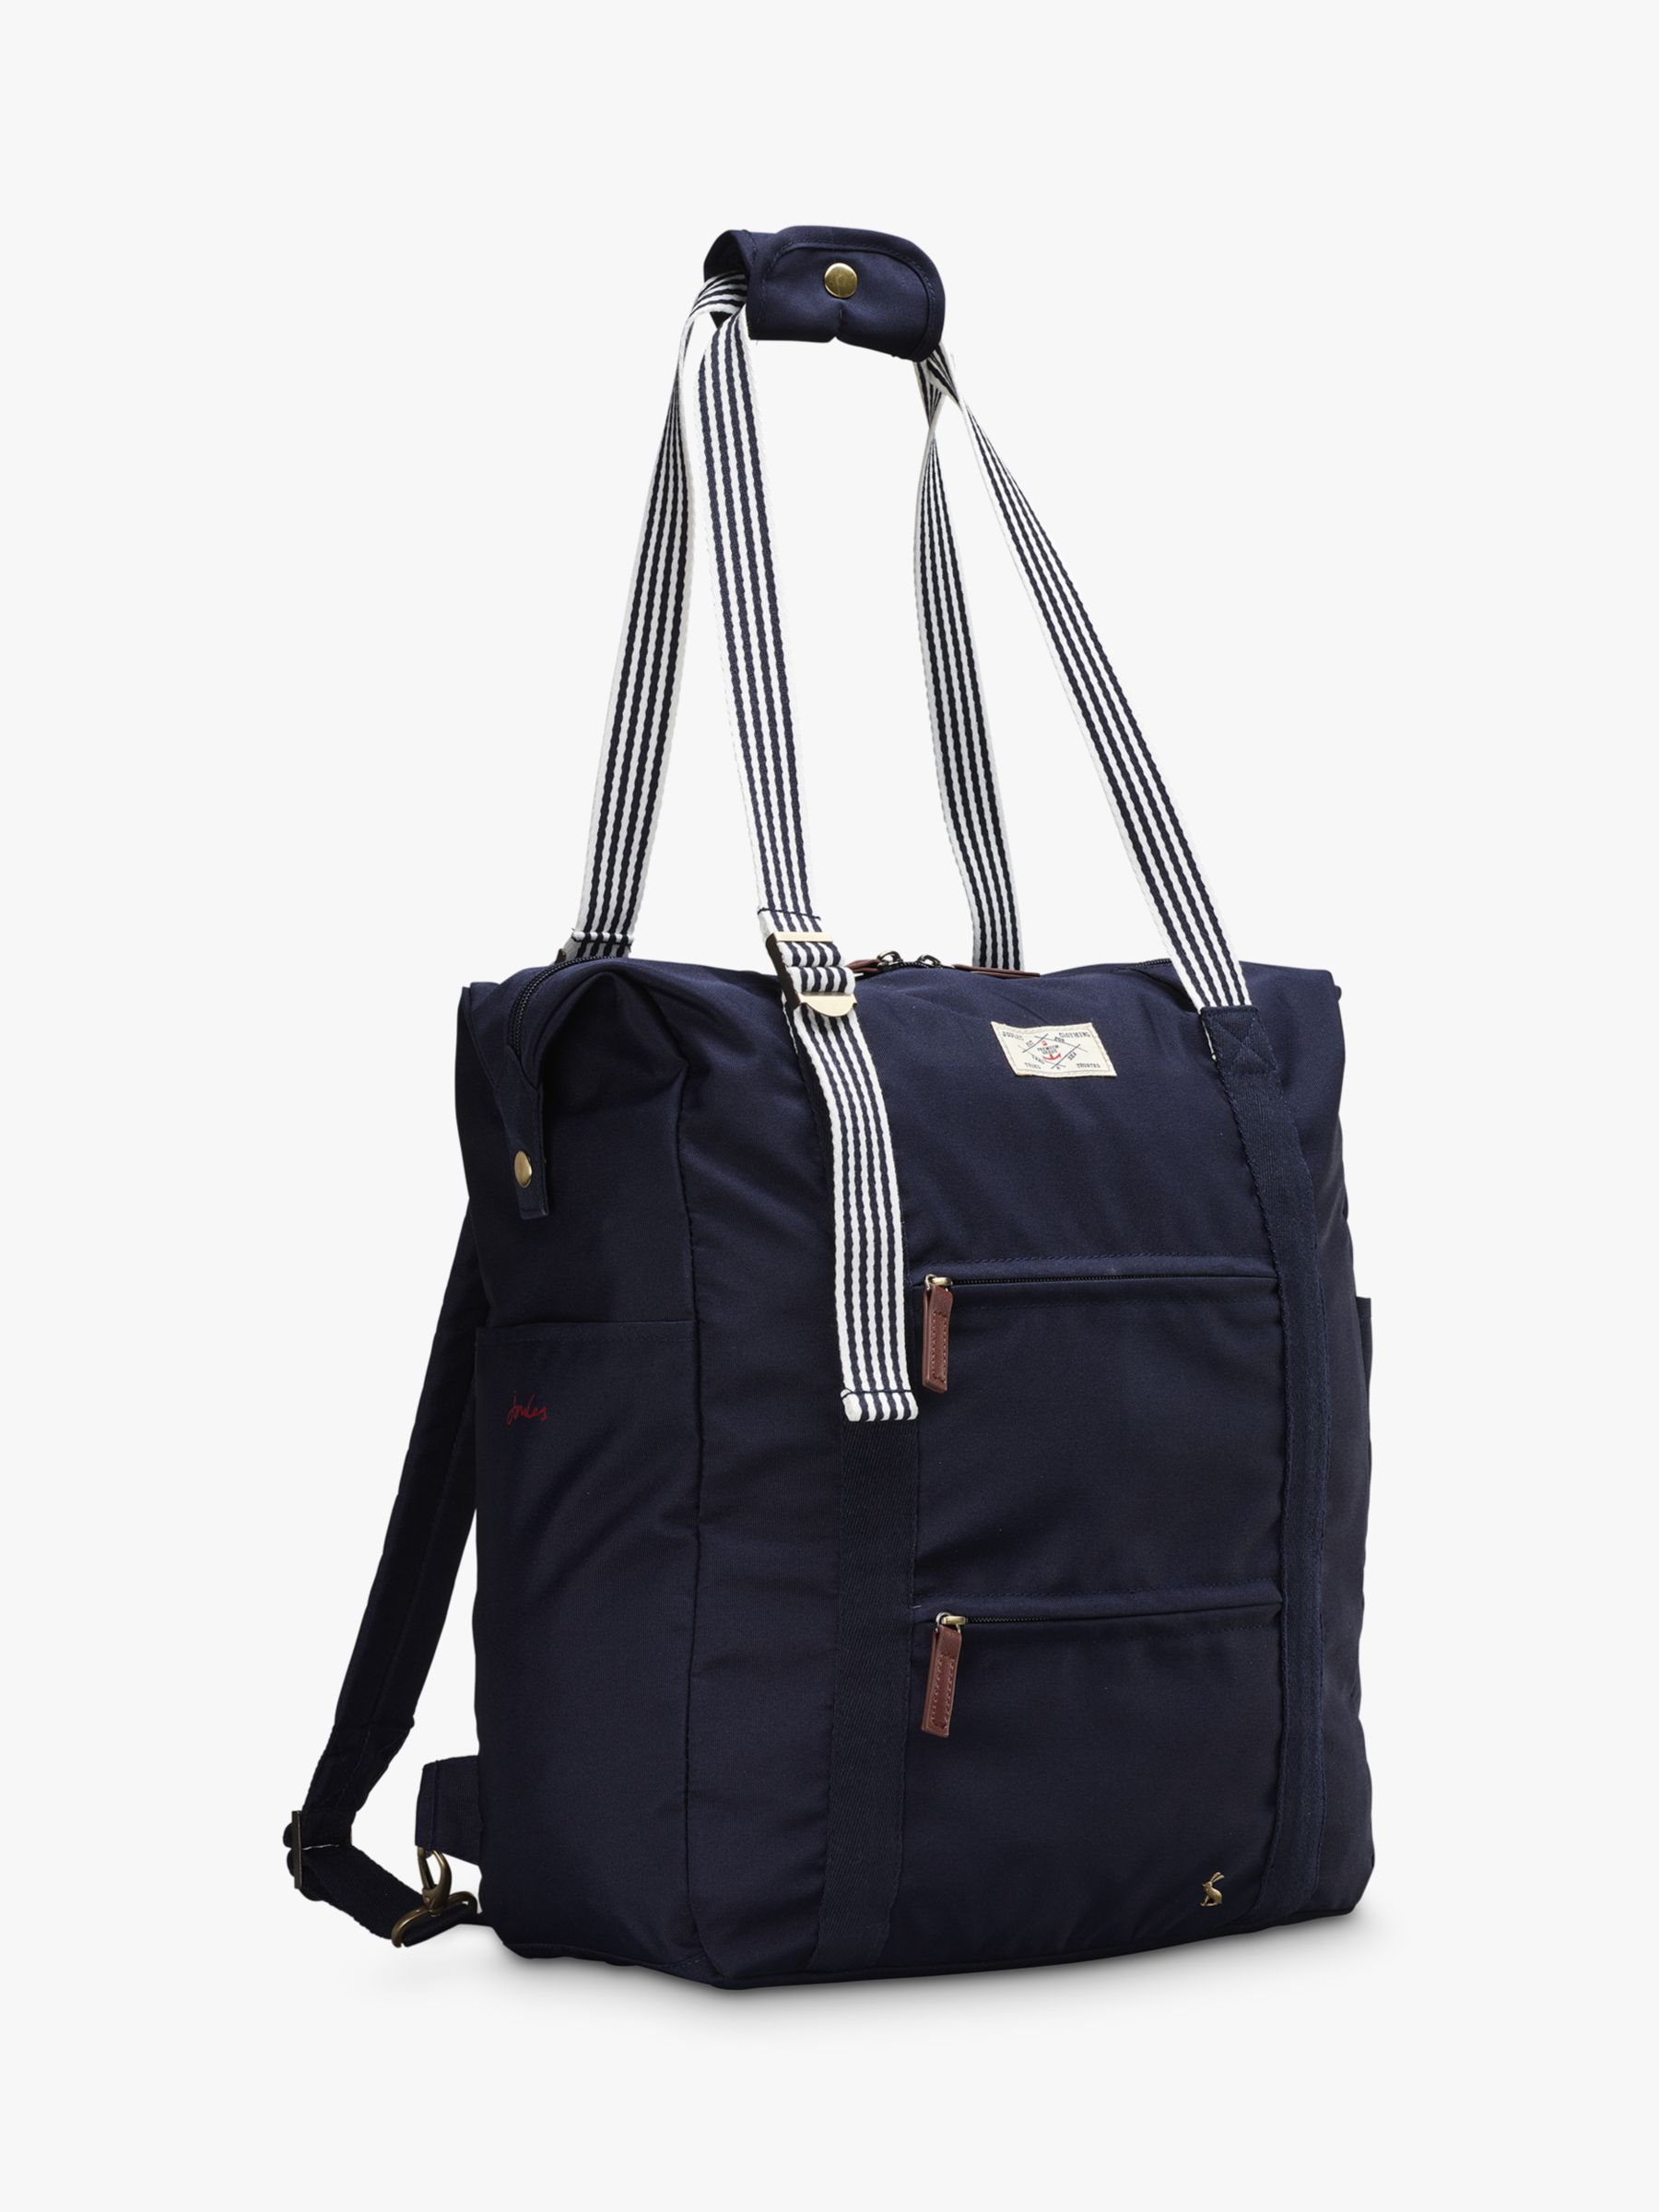 Buy Joules Coast Collection Travel Backpack Online at johnlewis.com